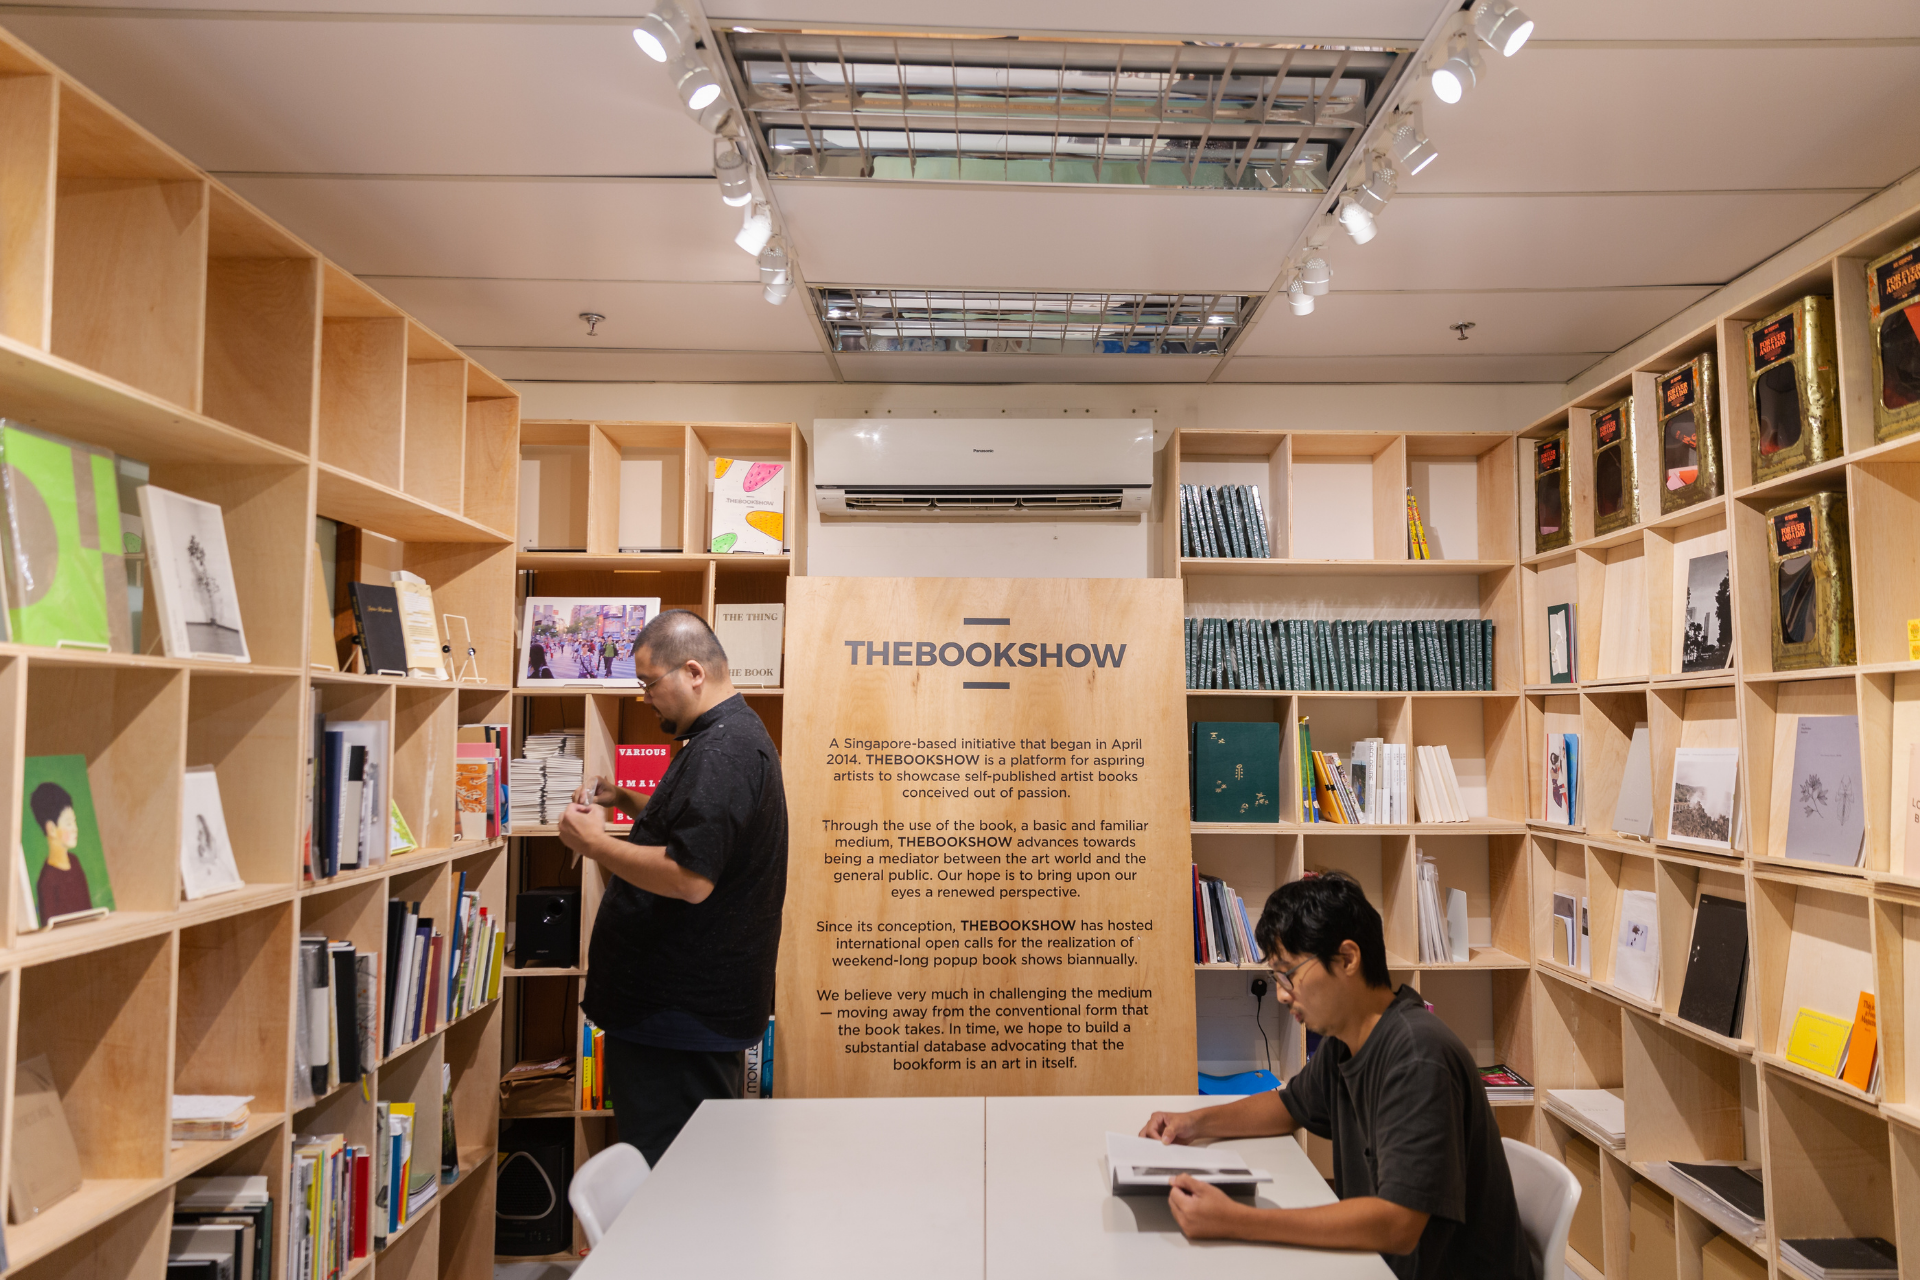 "There is also an exhibition space, and THEBOOKSHOW library where we keep a collection of artist books from Singapore and abroad."